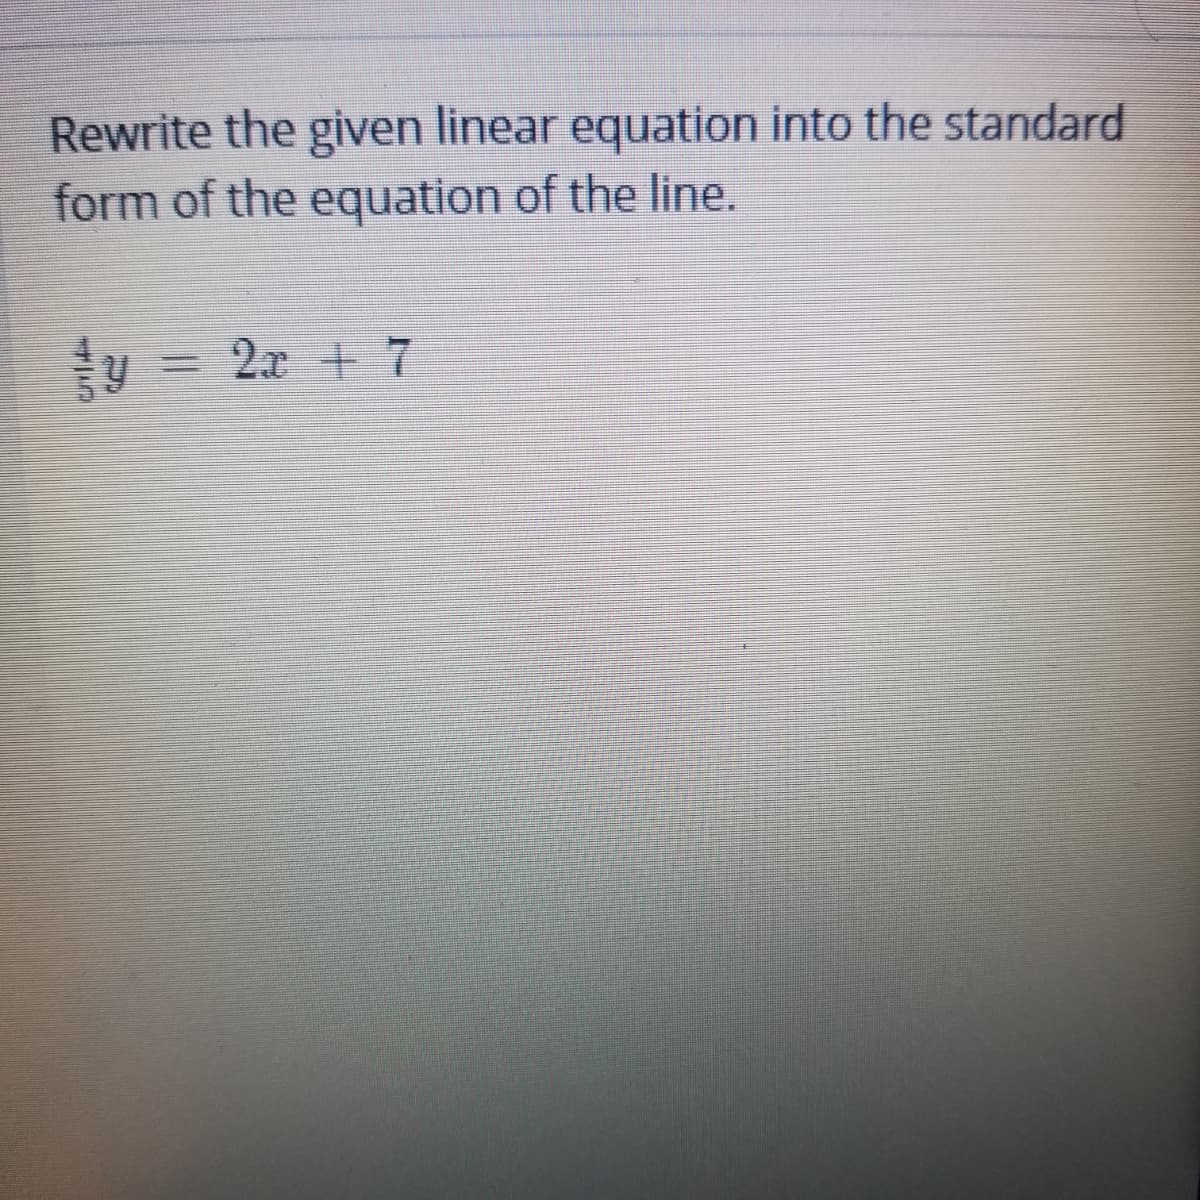 Rewrite the given linear equation into the standard
form of the equation of the line.
=
2x + 7
